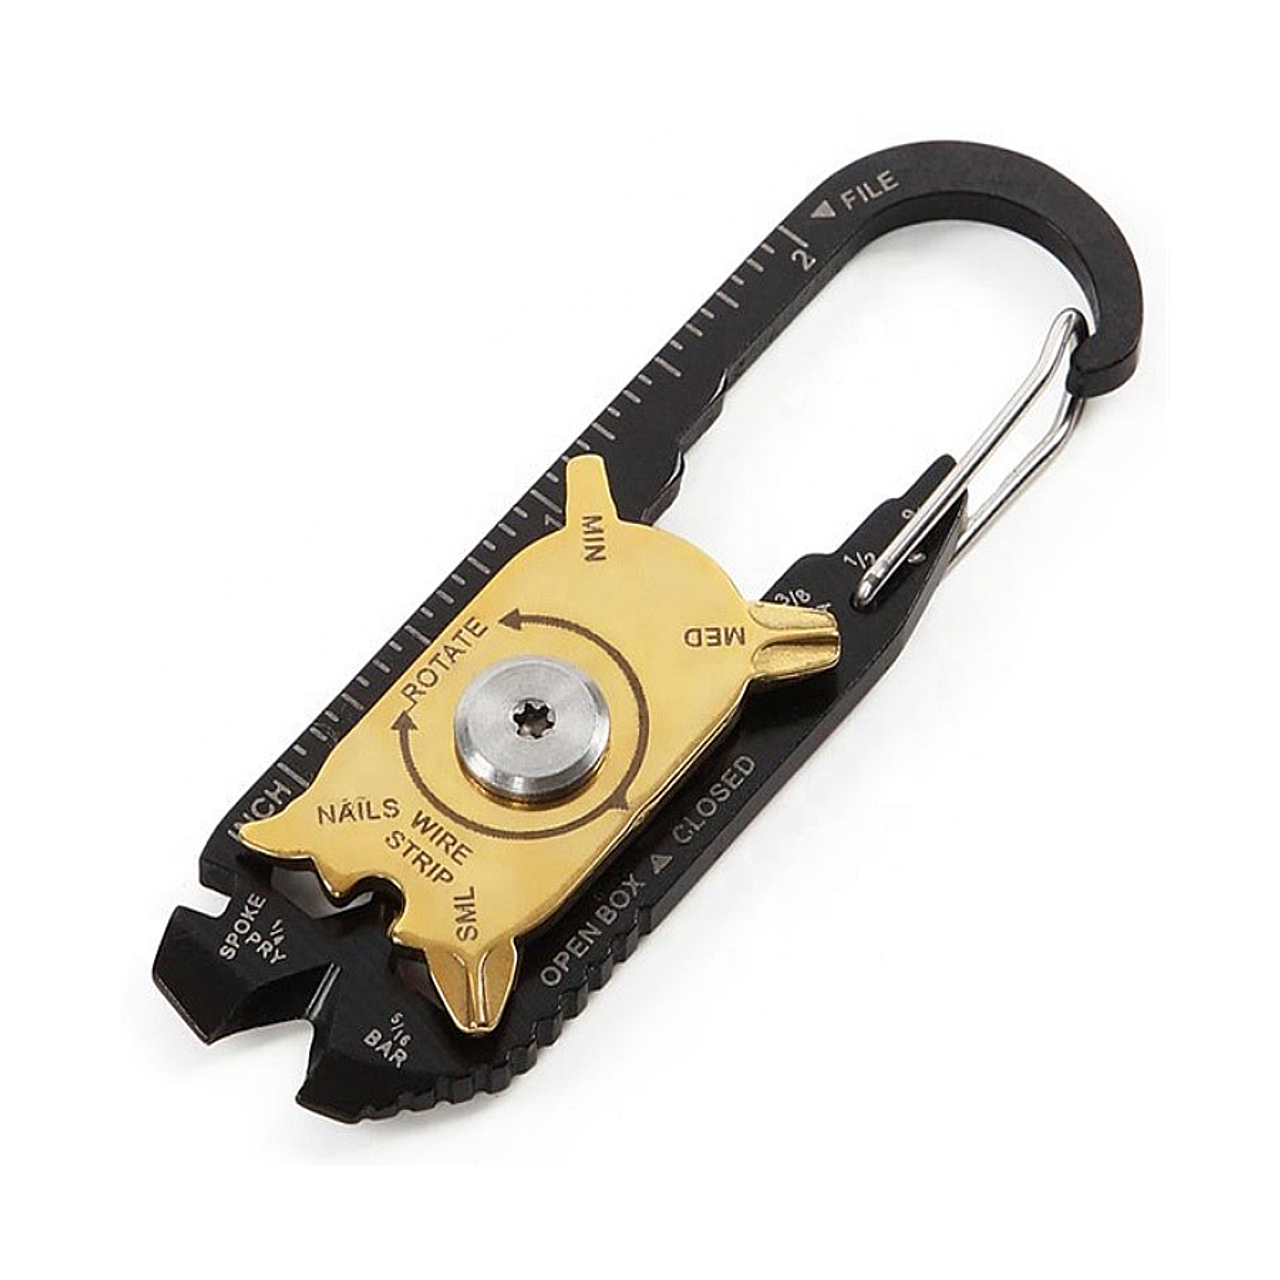 20-in-1 Multi-Tool product image